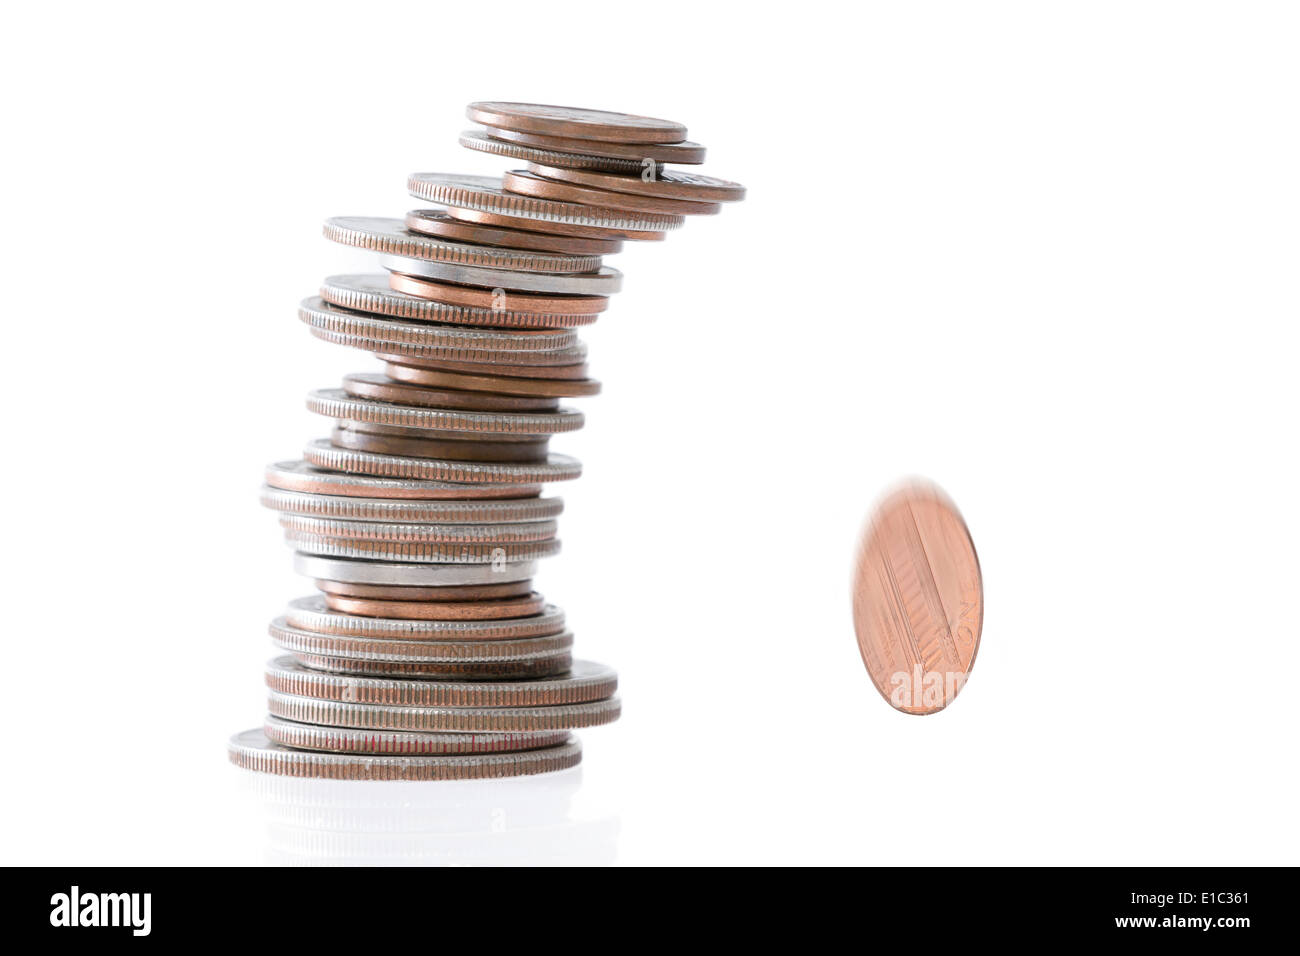 Precarious stack of coins of different denominations leaning to the side and falling over with one coin rolling away with motion Stock Photo